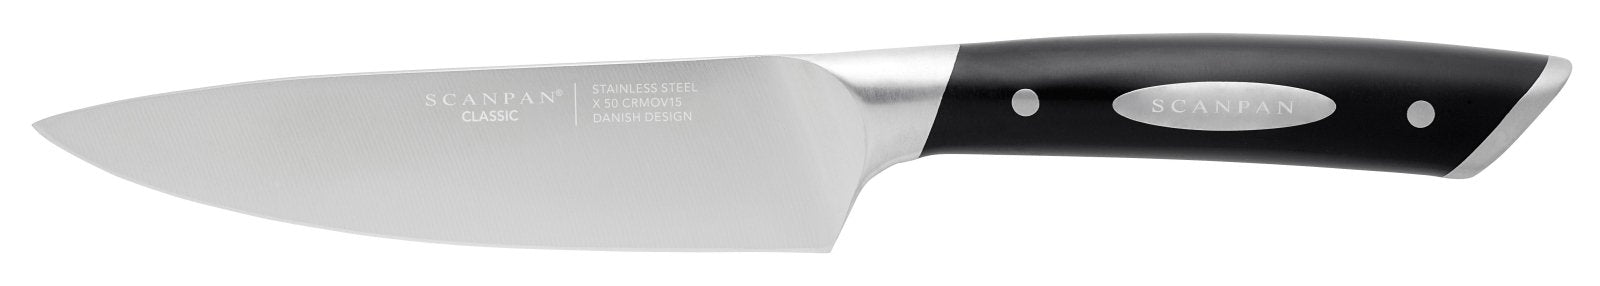 Scanpan Classic 15cm Cook's Knife - SP92501500 - The Cotswold Knife Company